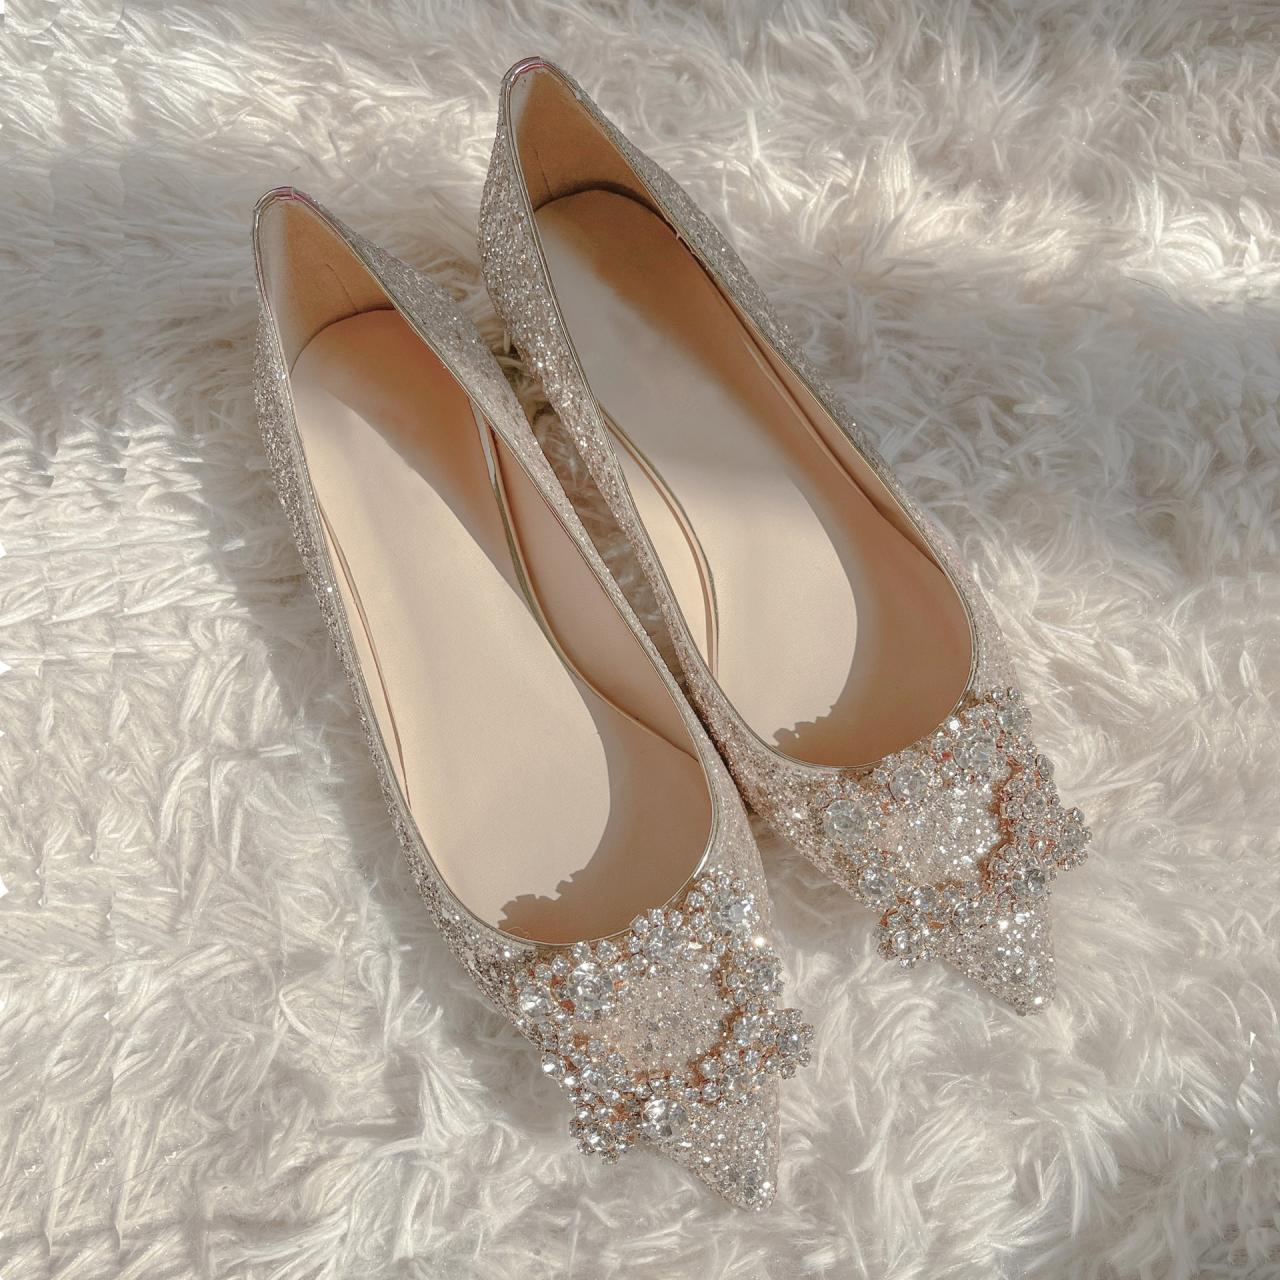 Wedding Shoes, Crystal, Glitter Wedding Bridesmaid Shoes, Pregnant Women Can Wear Single Shoes